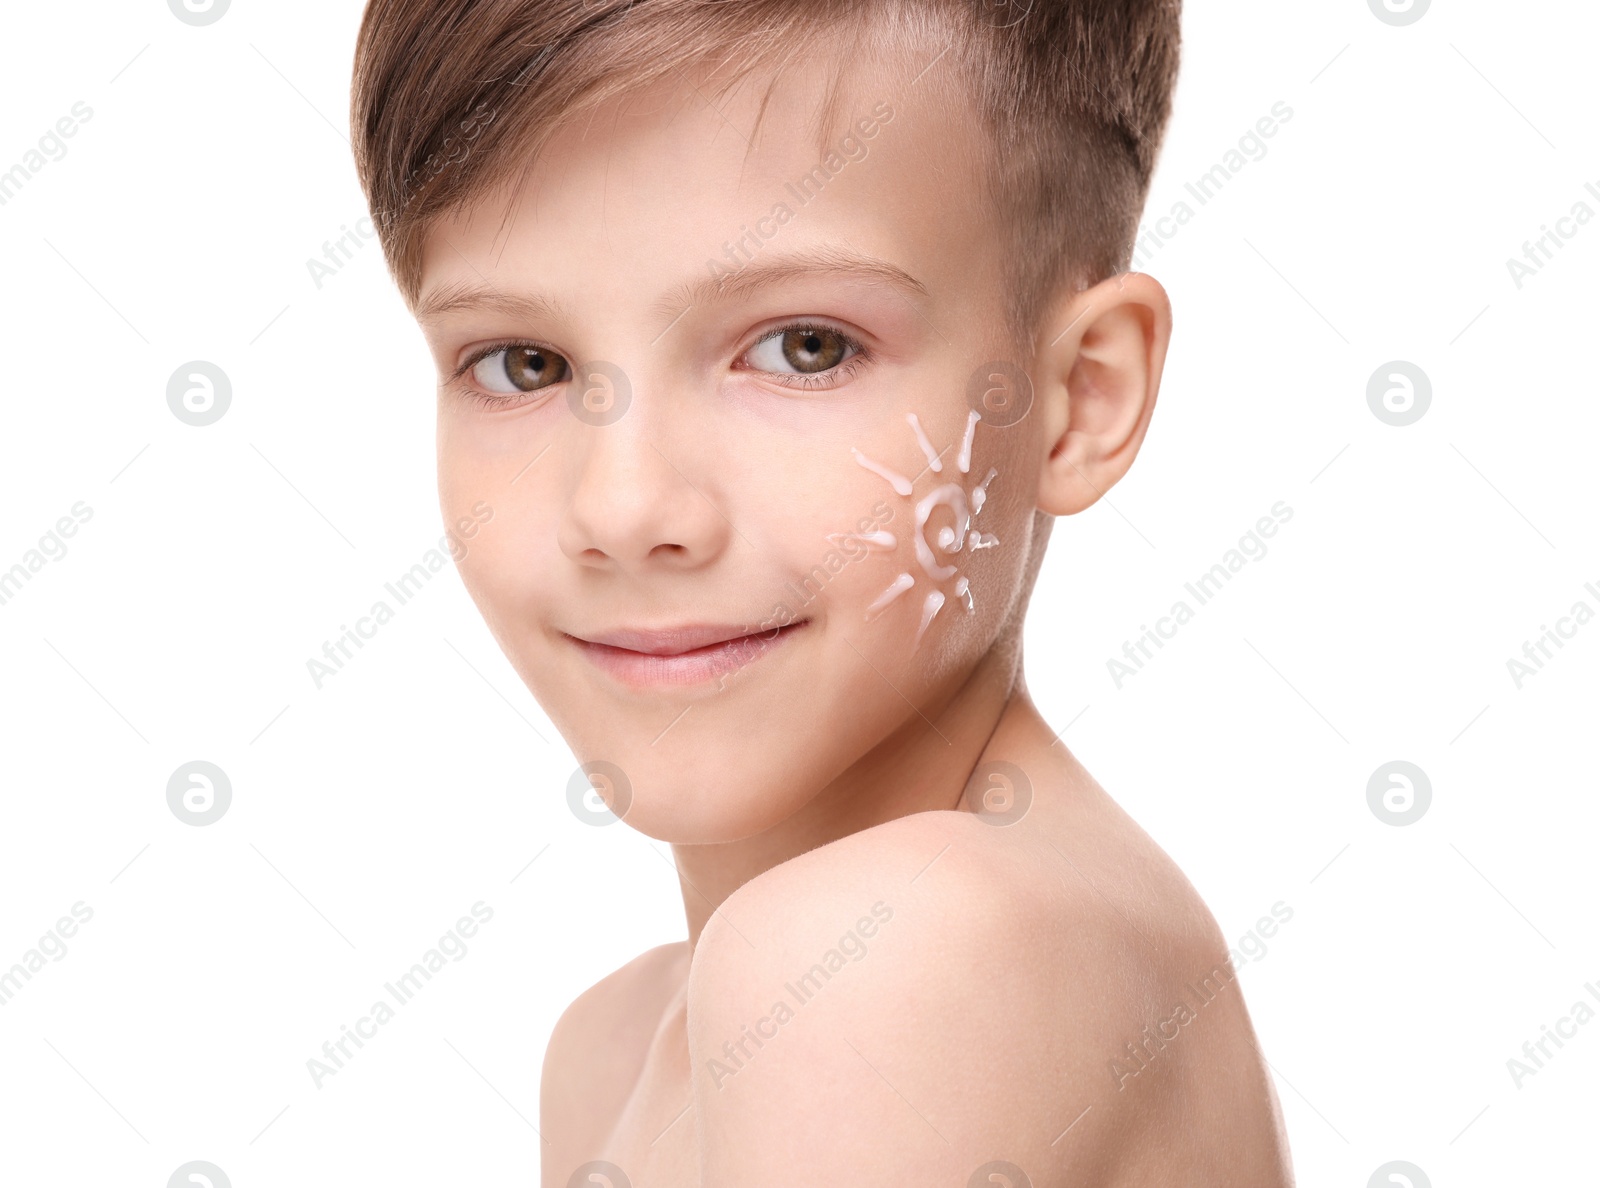 Photo of Smiling boy with sun protection cream on his face against white background